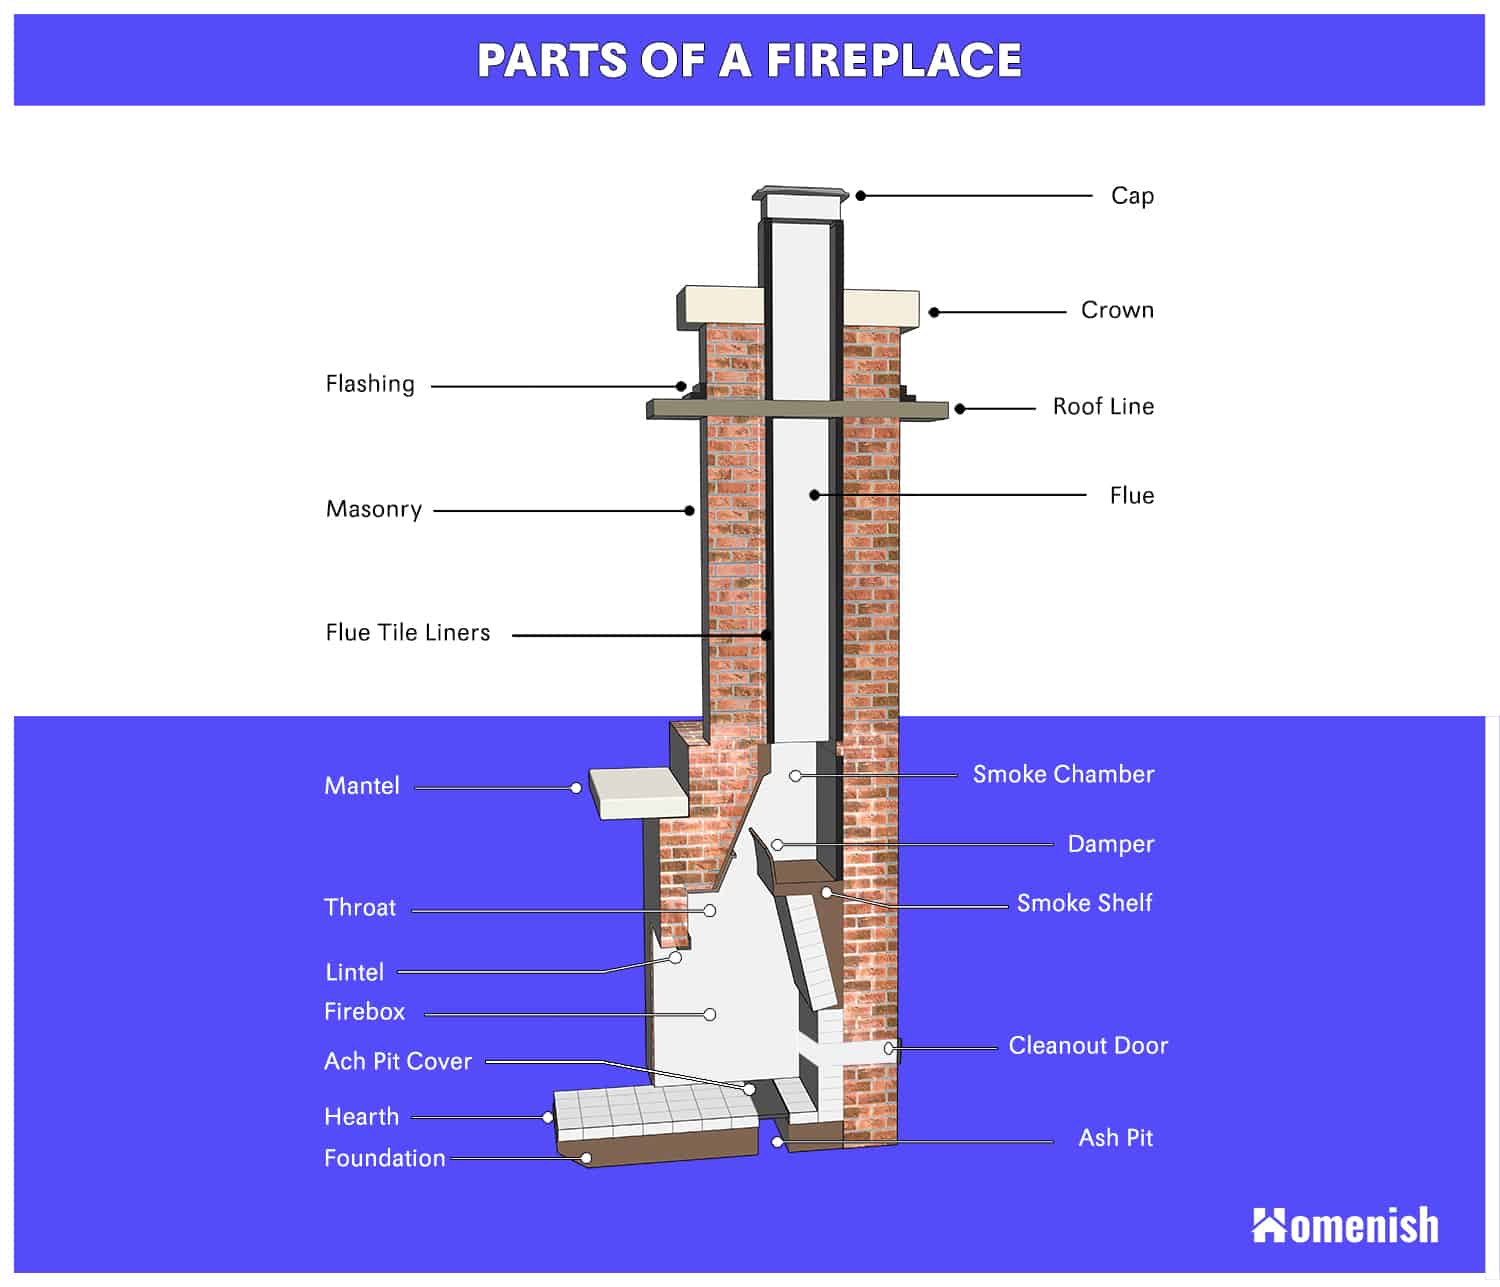 Parts Of A Fireplace Explained With, What Is The Inside Of A Fireplace Called